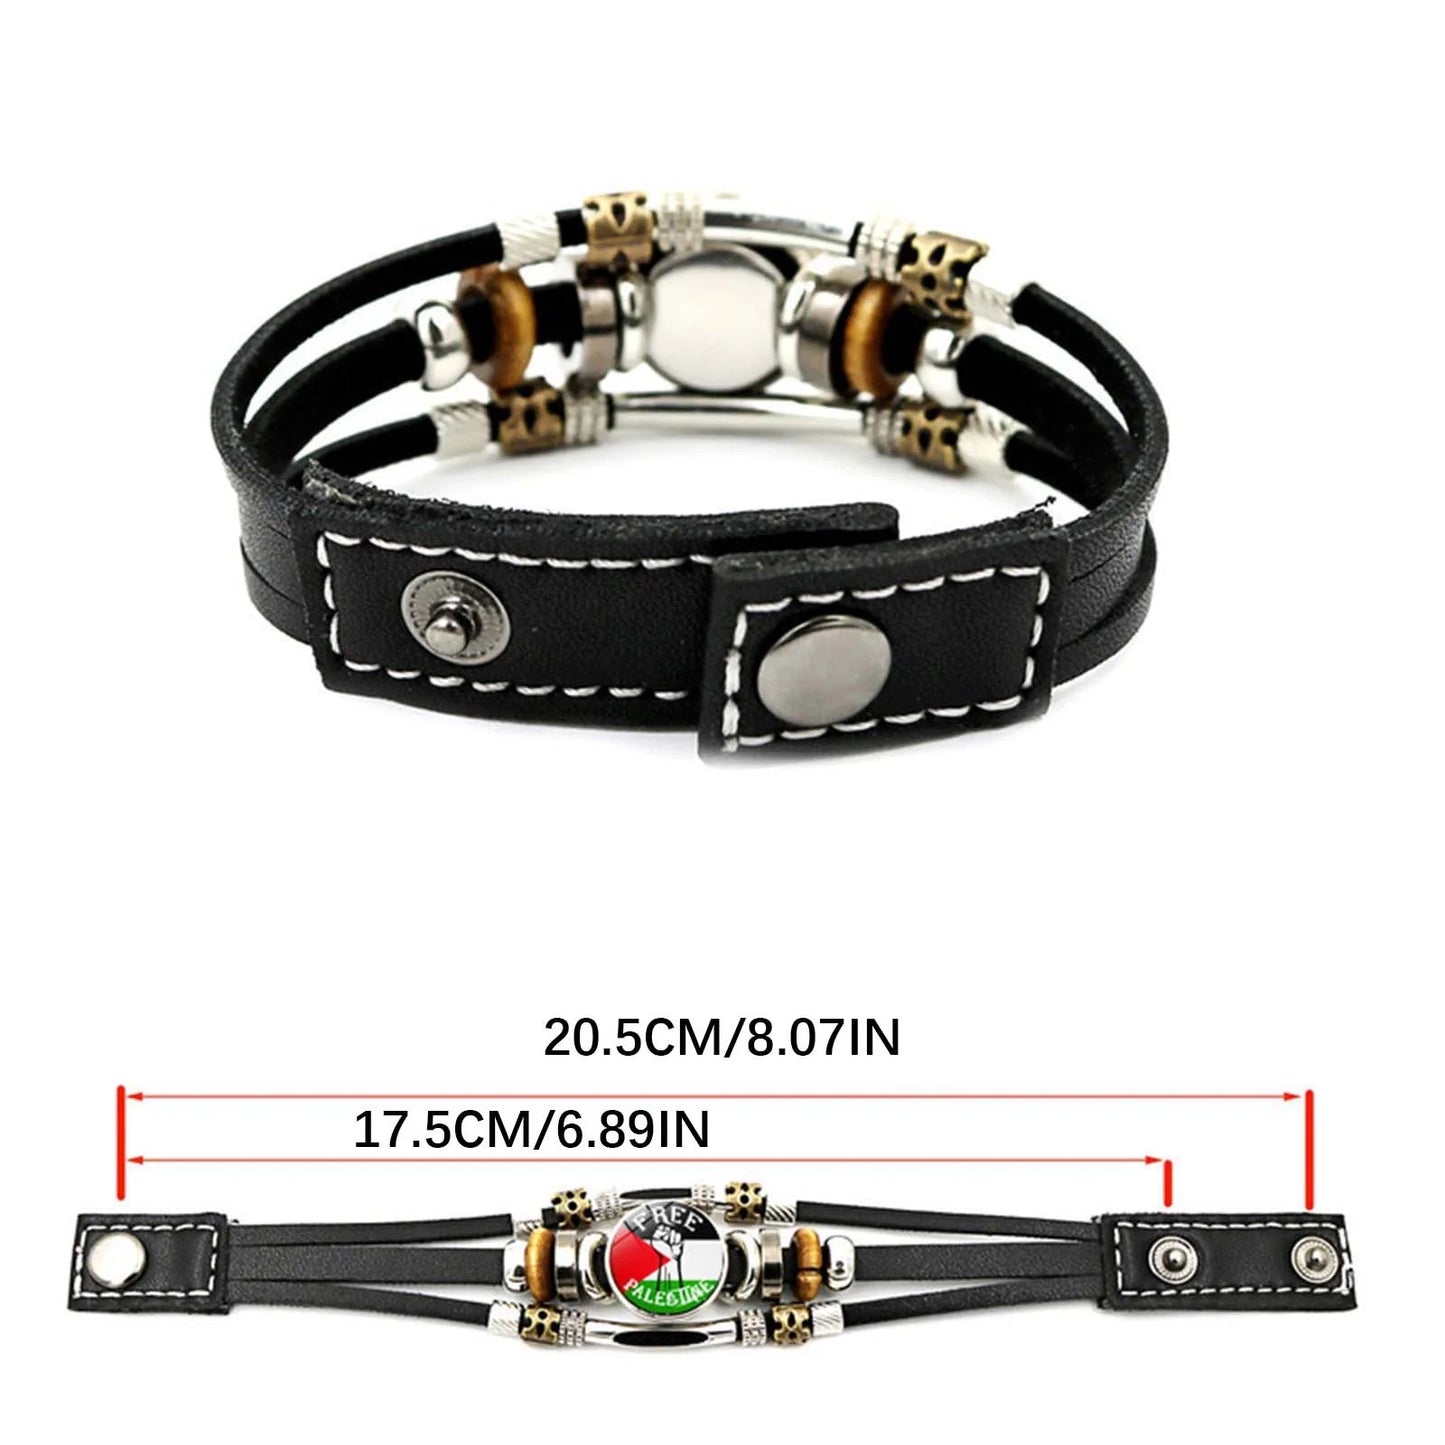 Palestine Flag Bracelets,Fashional Punk Vintage Leather Bracelet ,Costume Matching Accessories and Gift for Man Women